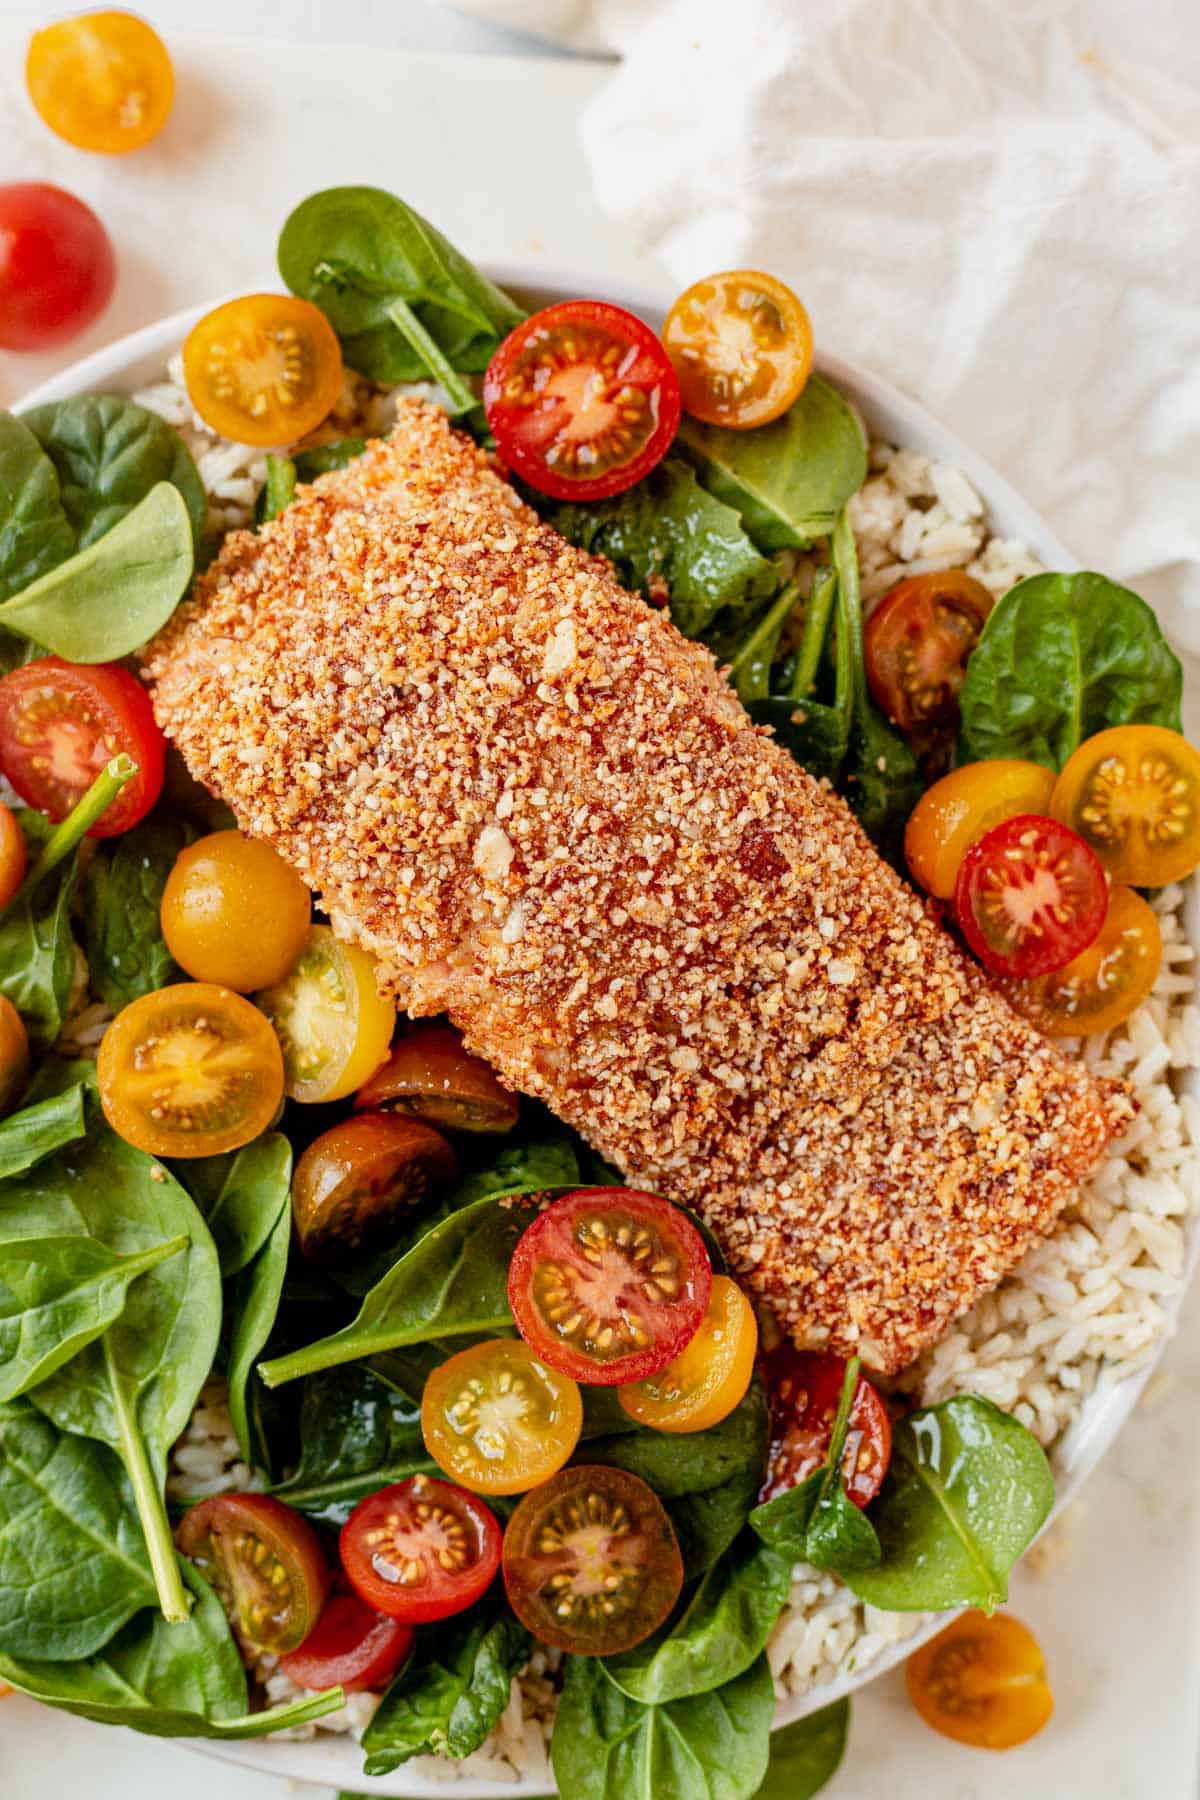 almond crusted salmon on a salad with tomatoes